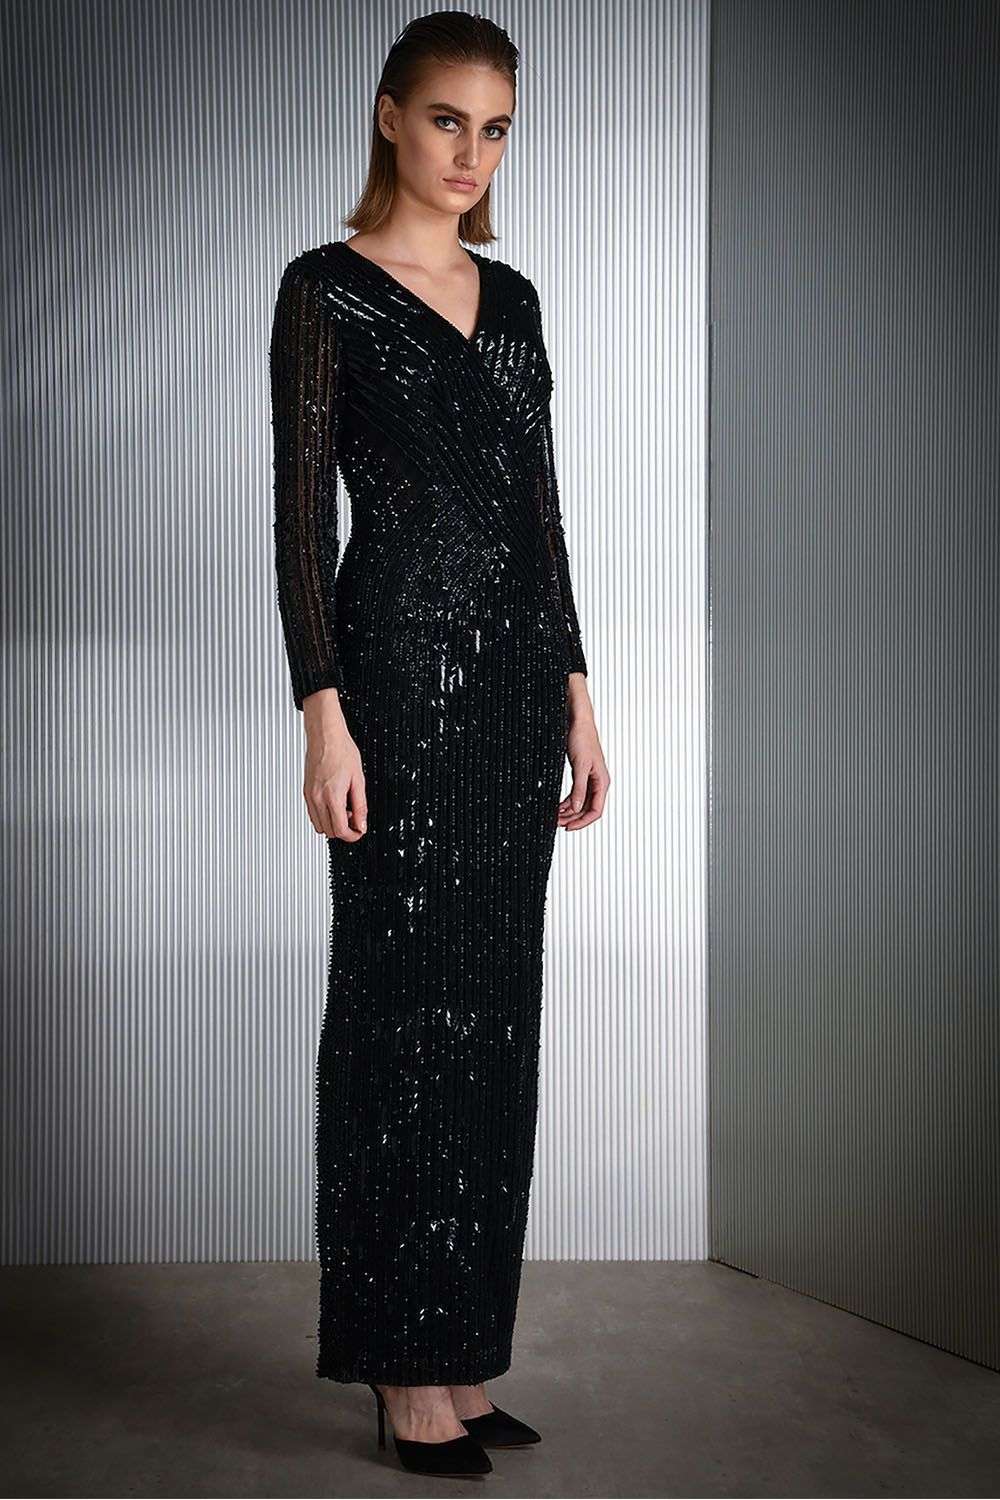 LOOKandLOVEwithLOLO: HOLIDAY::Party Dresses and Accessories